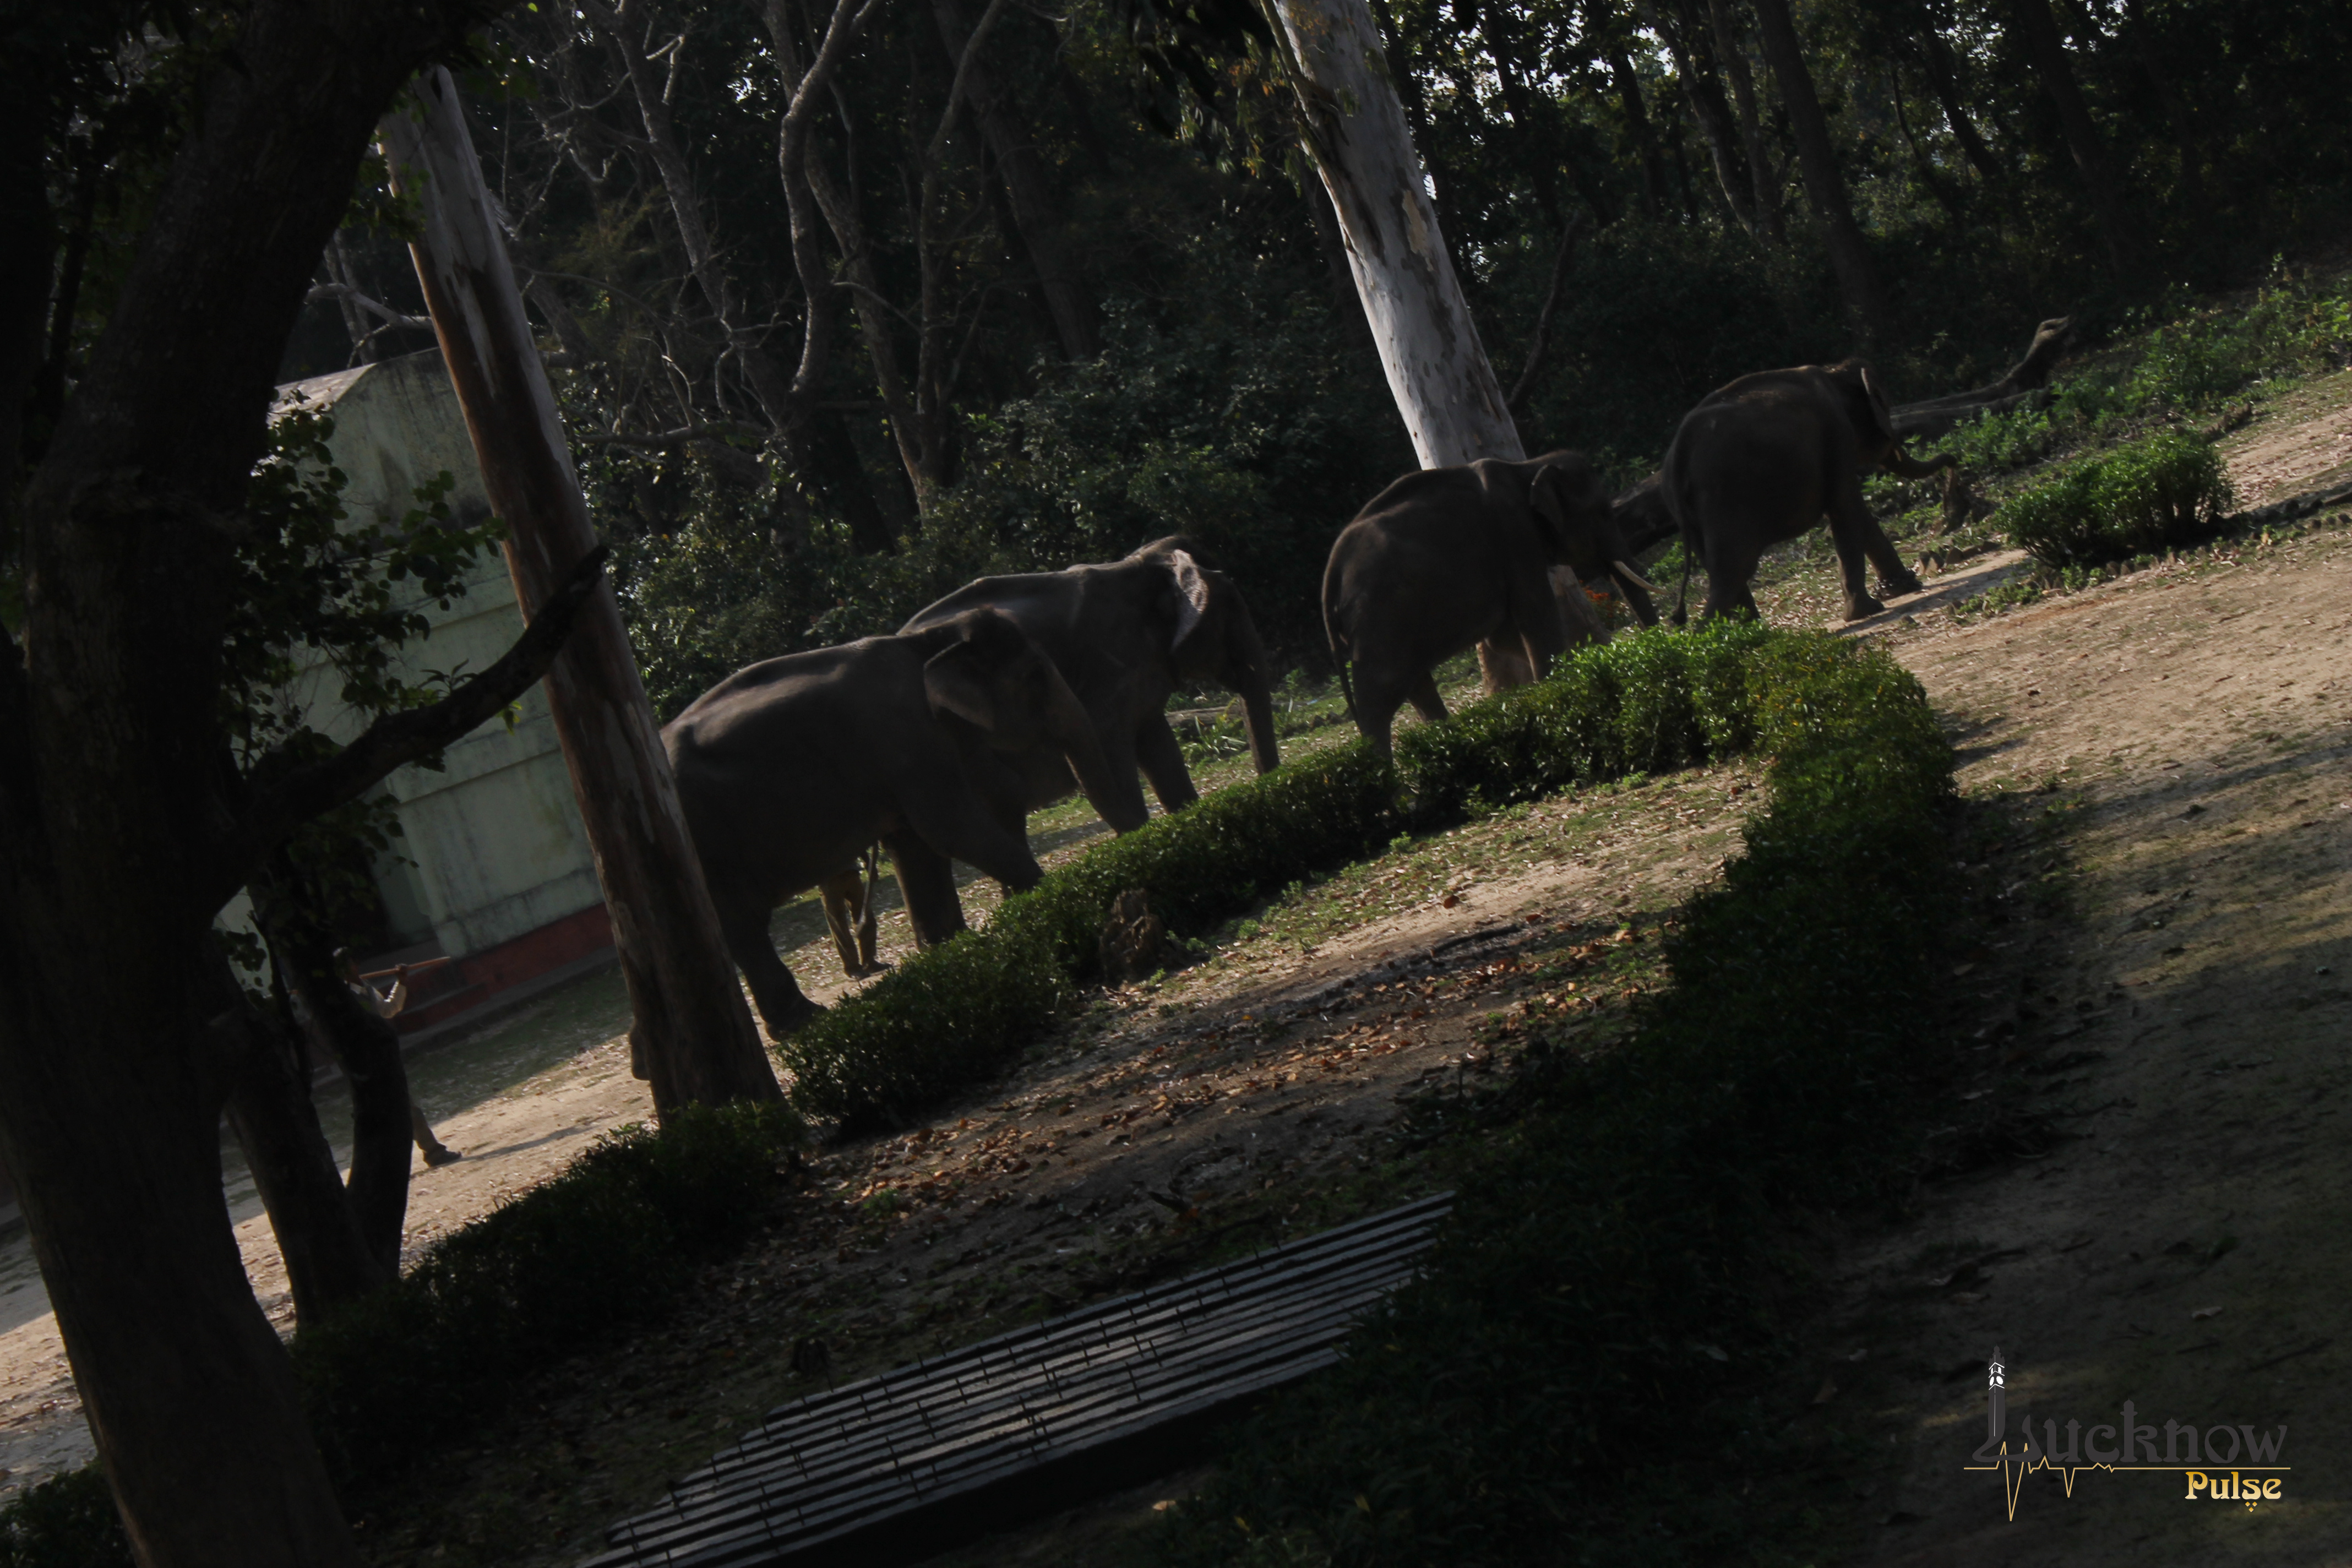 Picture showing Elephants at the Dudhwa National Park in India